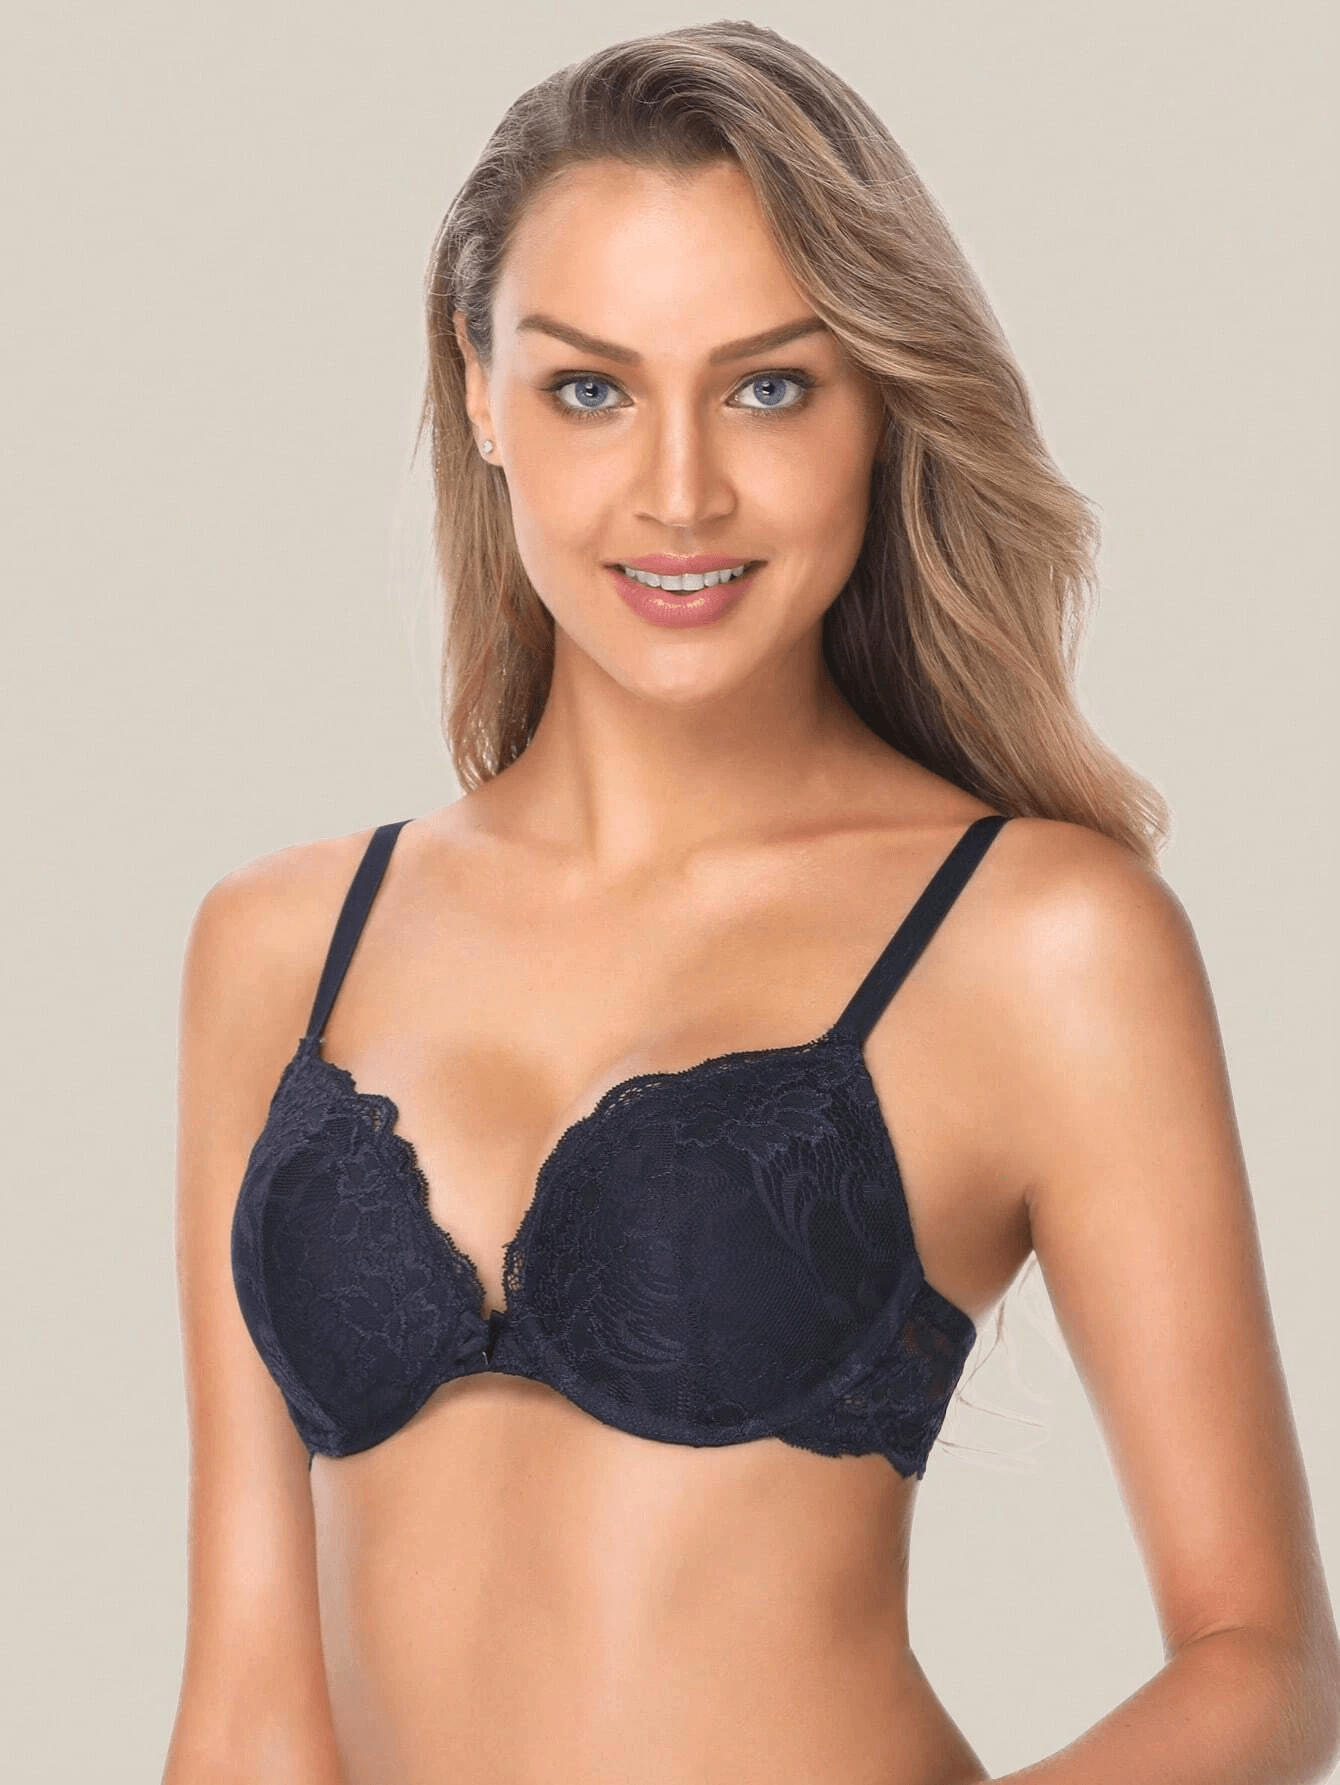 MJUHNHH Push Up Bras for Women,Plus Size Floral Lace Underwire